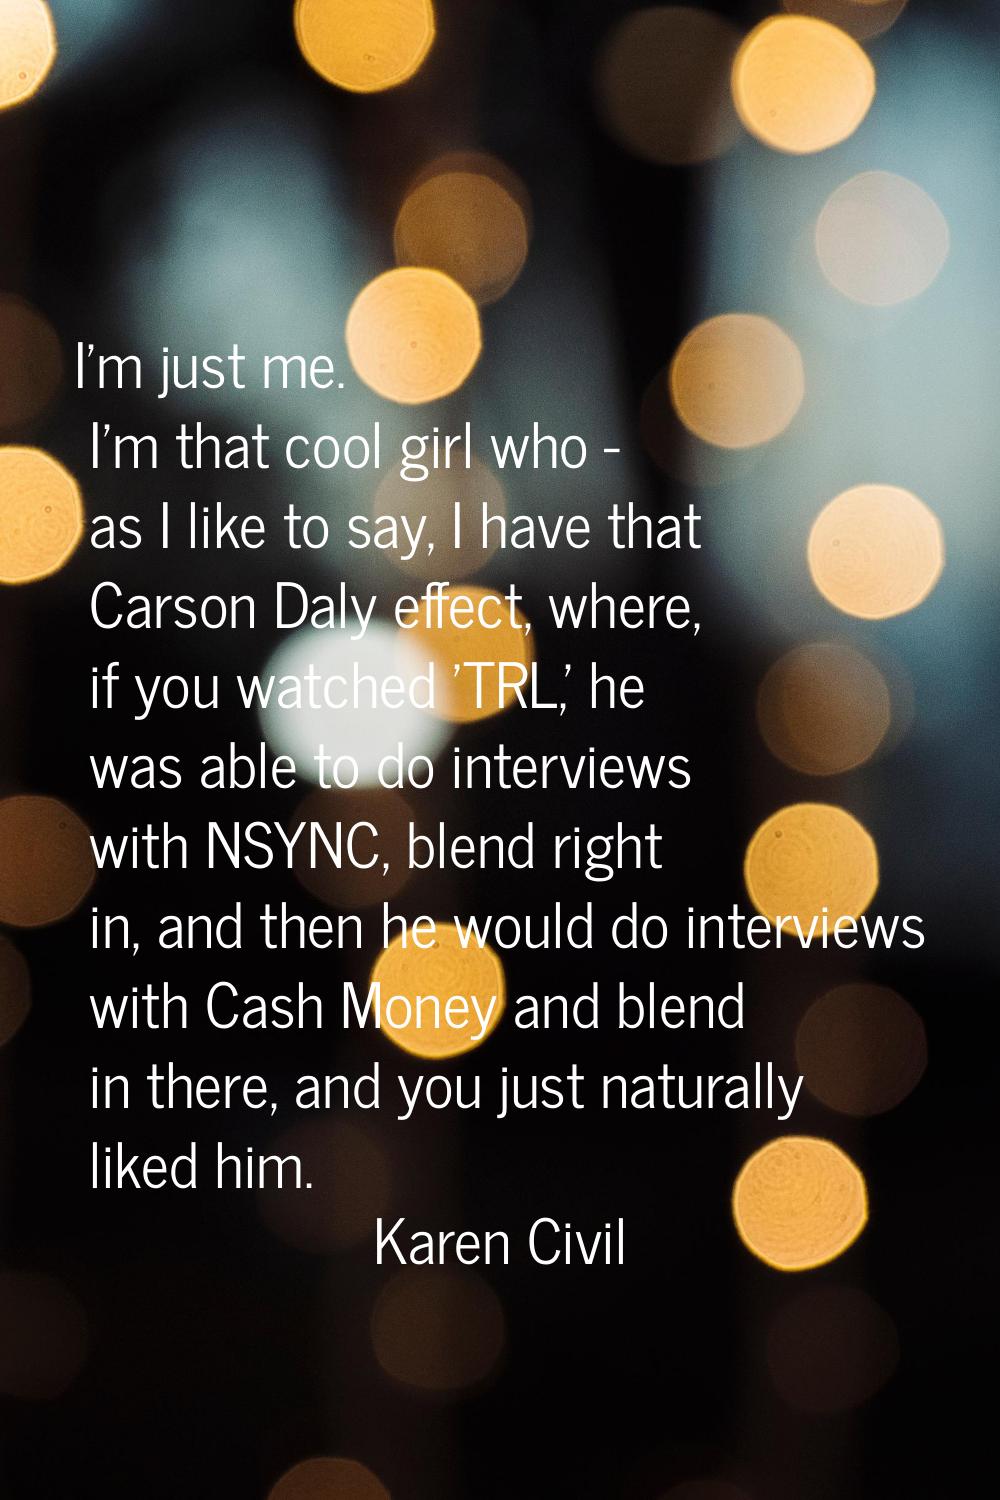 I'm just me. I'm that cool girl who - as I like to say, I have that Carson Daly effect, where, if y